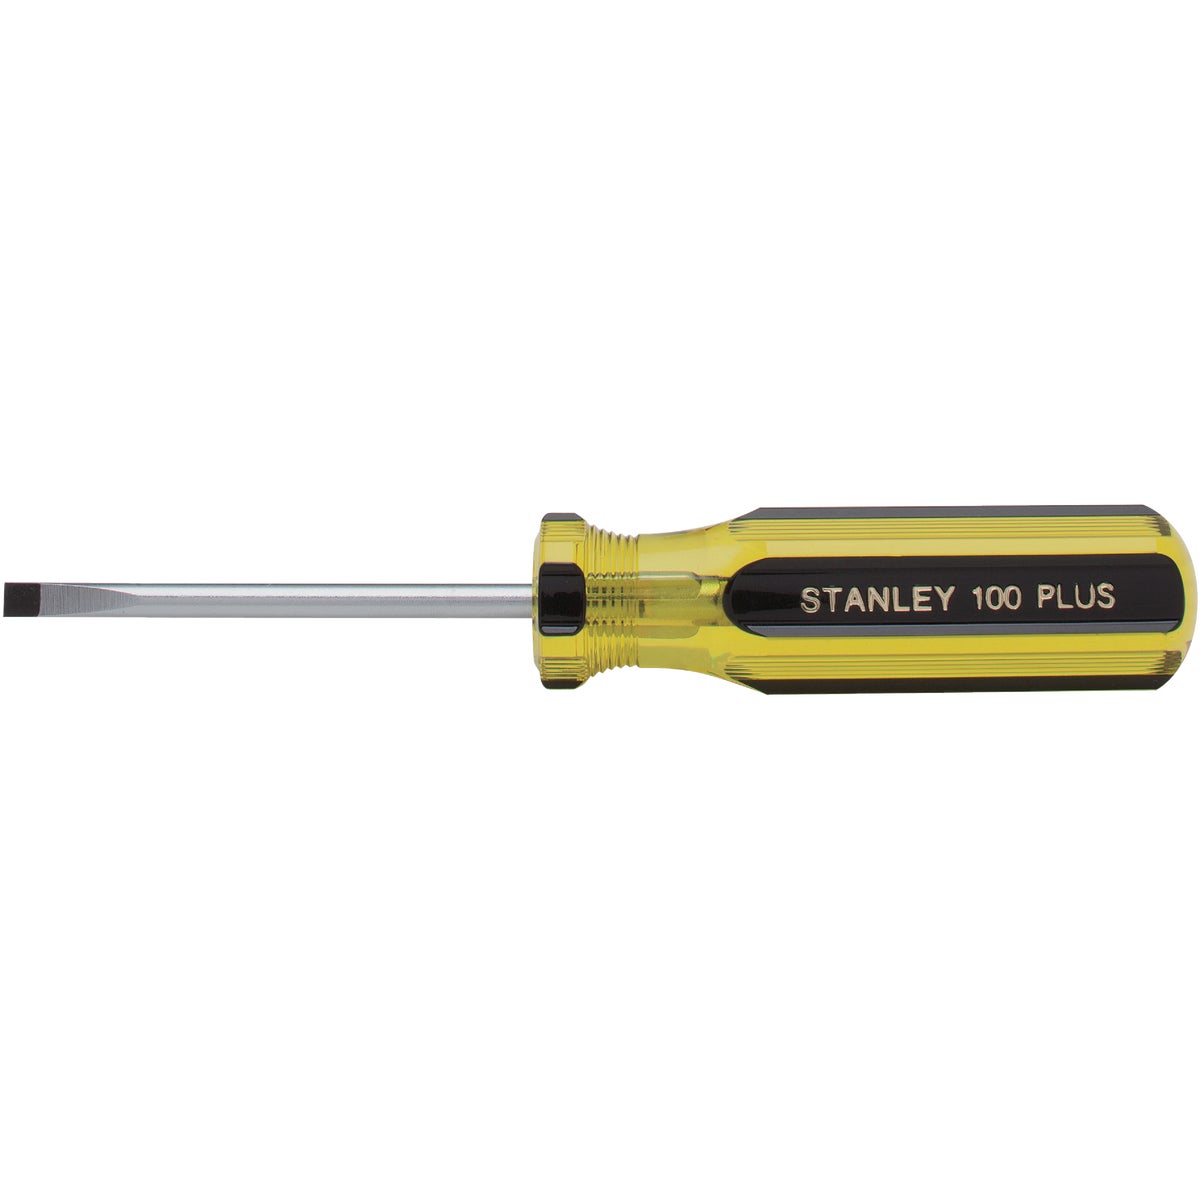 Stanley 100 PLUS 3/16 In. x 3 In. Cabinet Tip Slotted Screwdriver